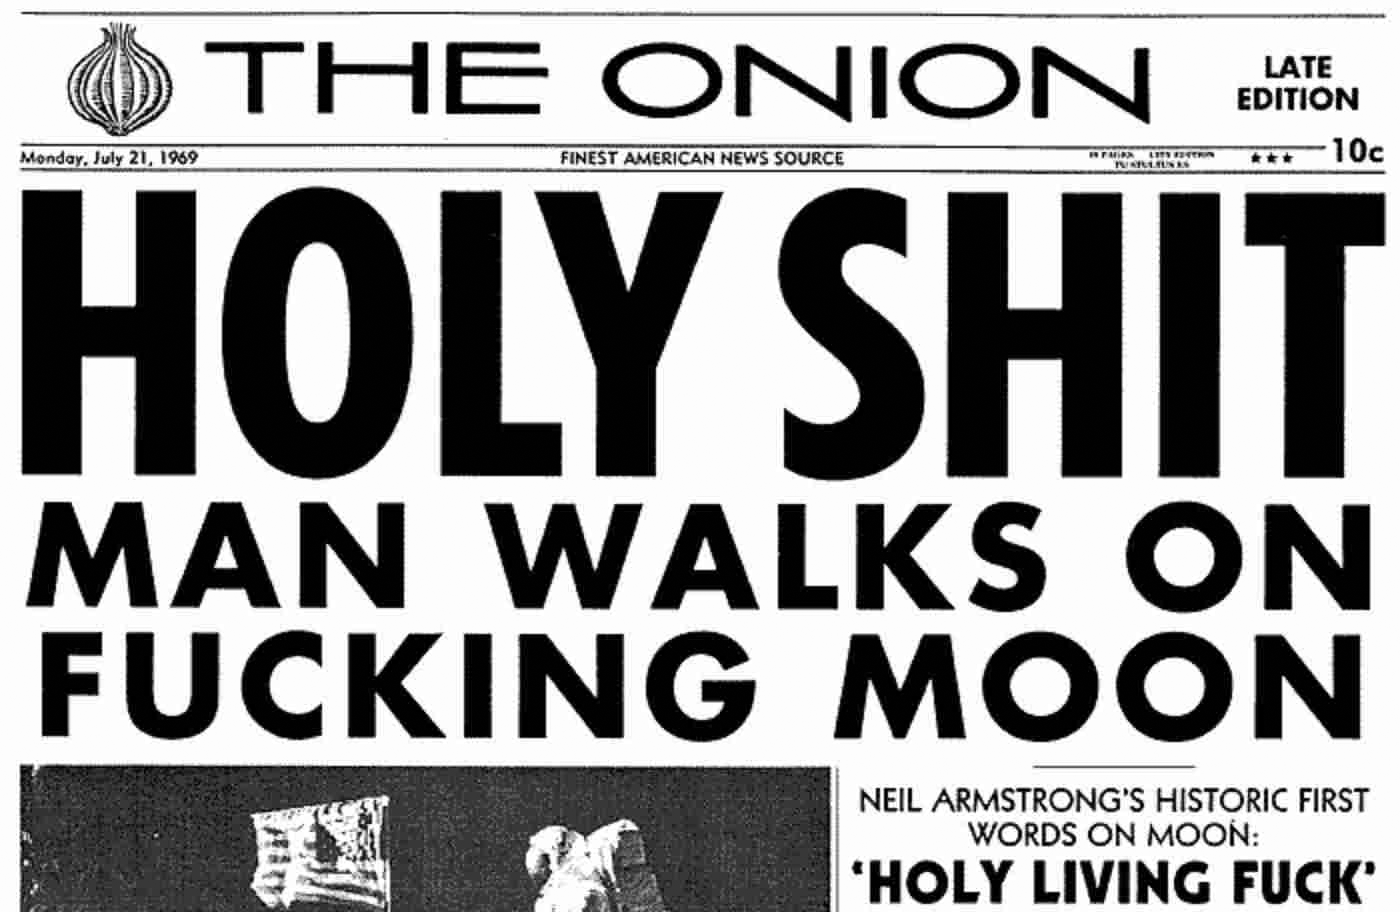 The text, 'Holy shit, man walks on fucking moon' set in all-caps type that takes up seven eigths of the top half of the front page of a newspaper. The newspaper is The Onion Late Edition, quote published on July 21, 2969. Underneath the headline is a subhead that reads, 'Neil Armstrong's historic first words on the moon: Holy living fuck.'